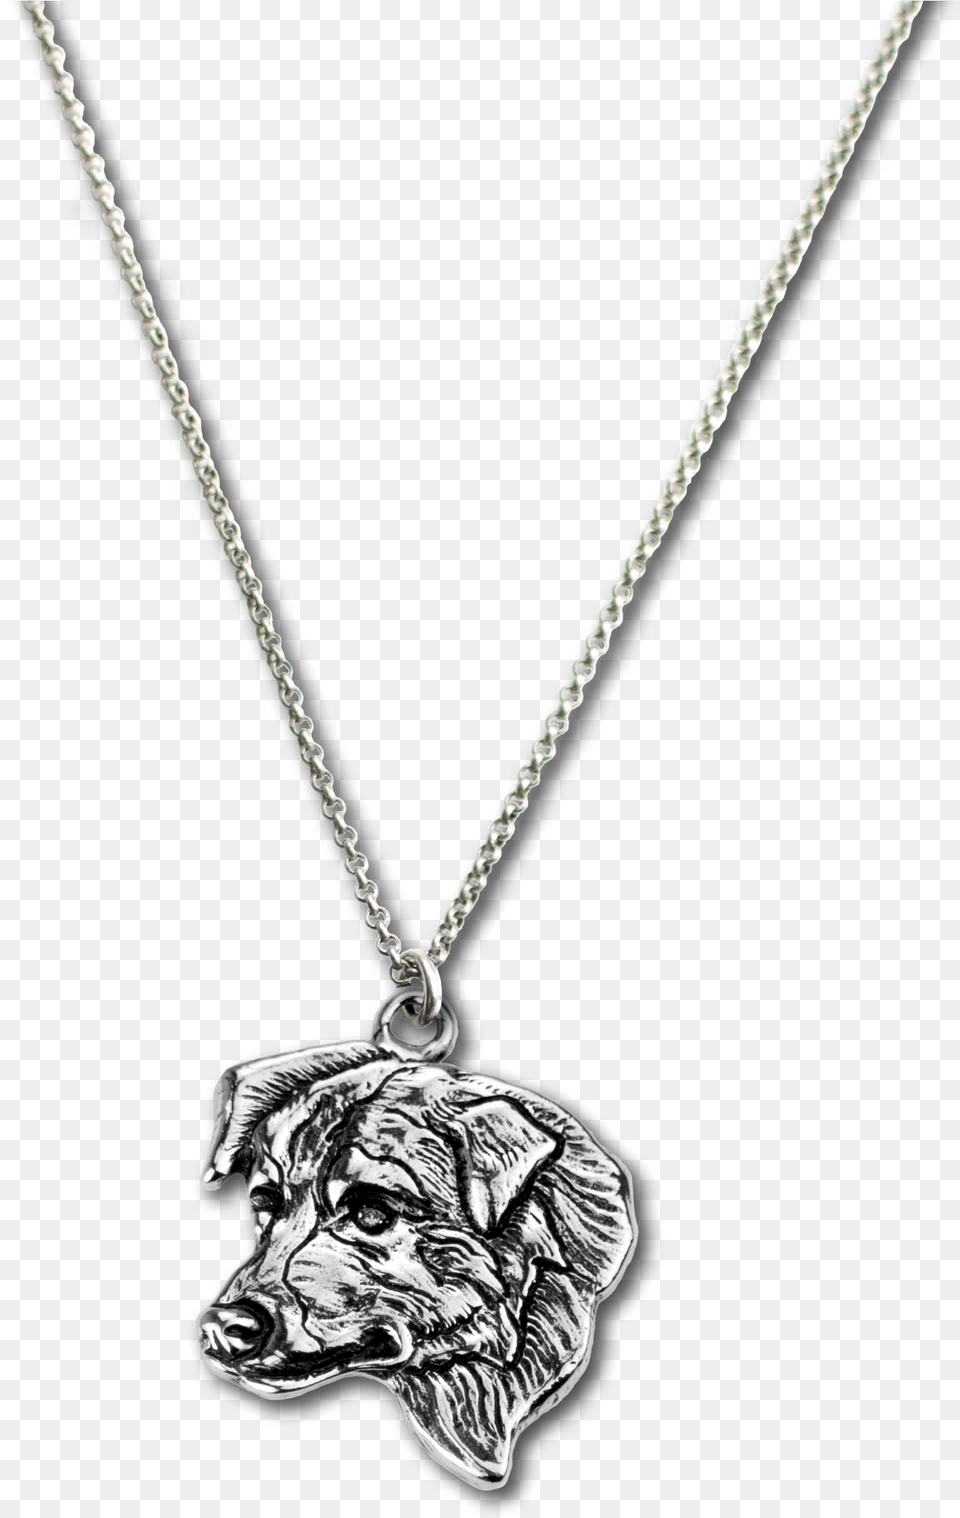 Pendant, Accessories, Jewelry, Necklace, Diamond Png